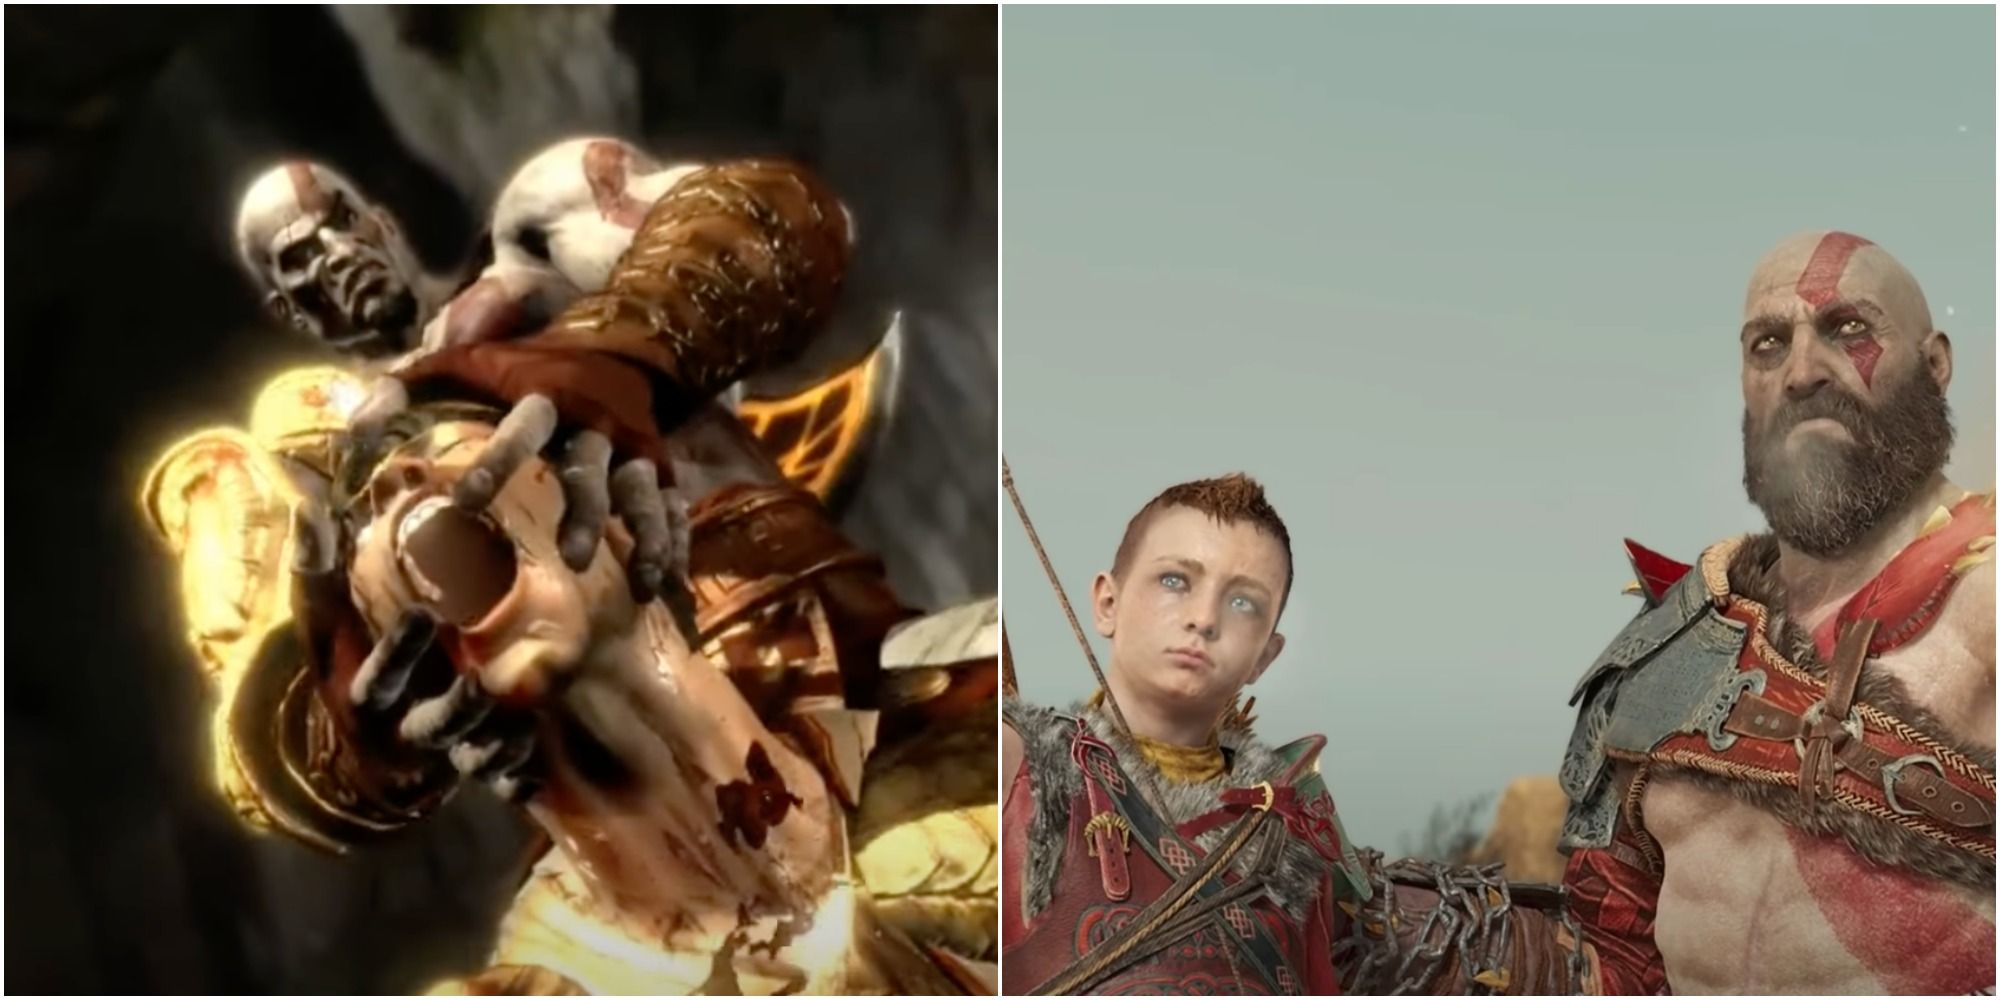 God of War Kratos is no longer motivated by vengeance